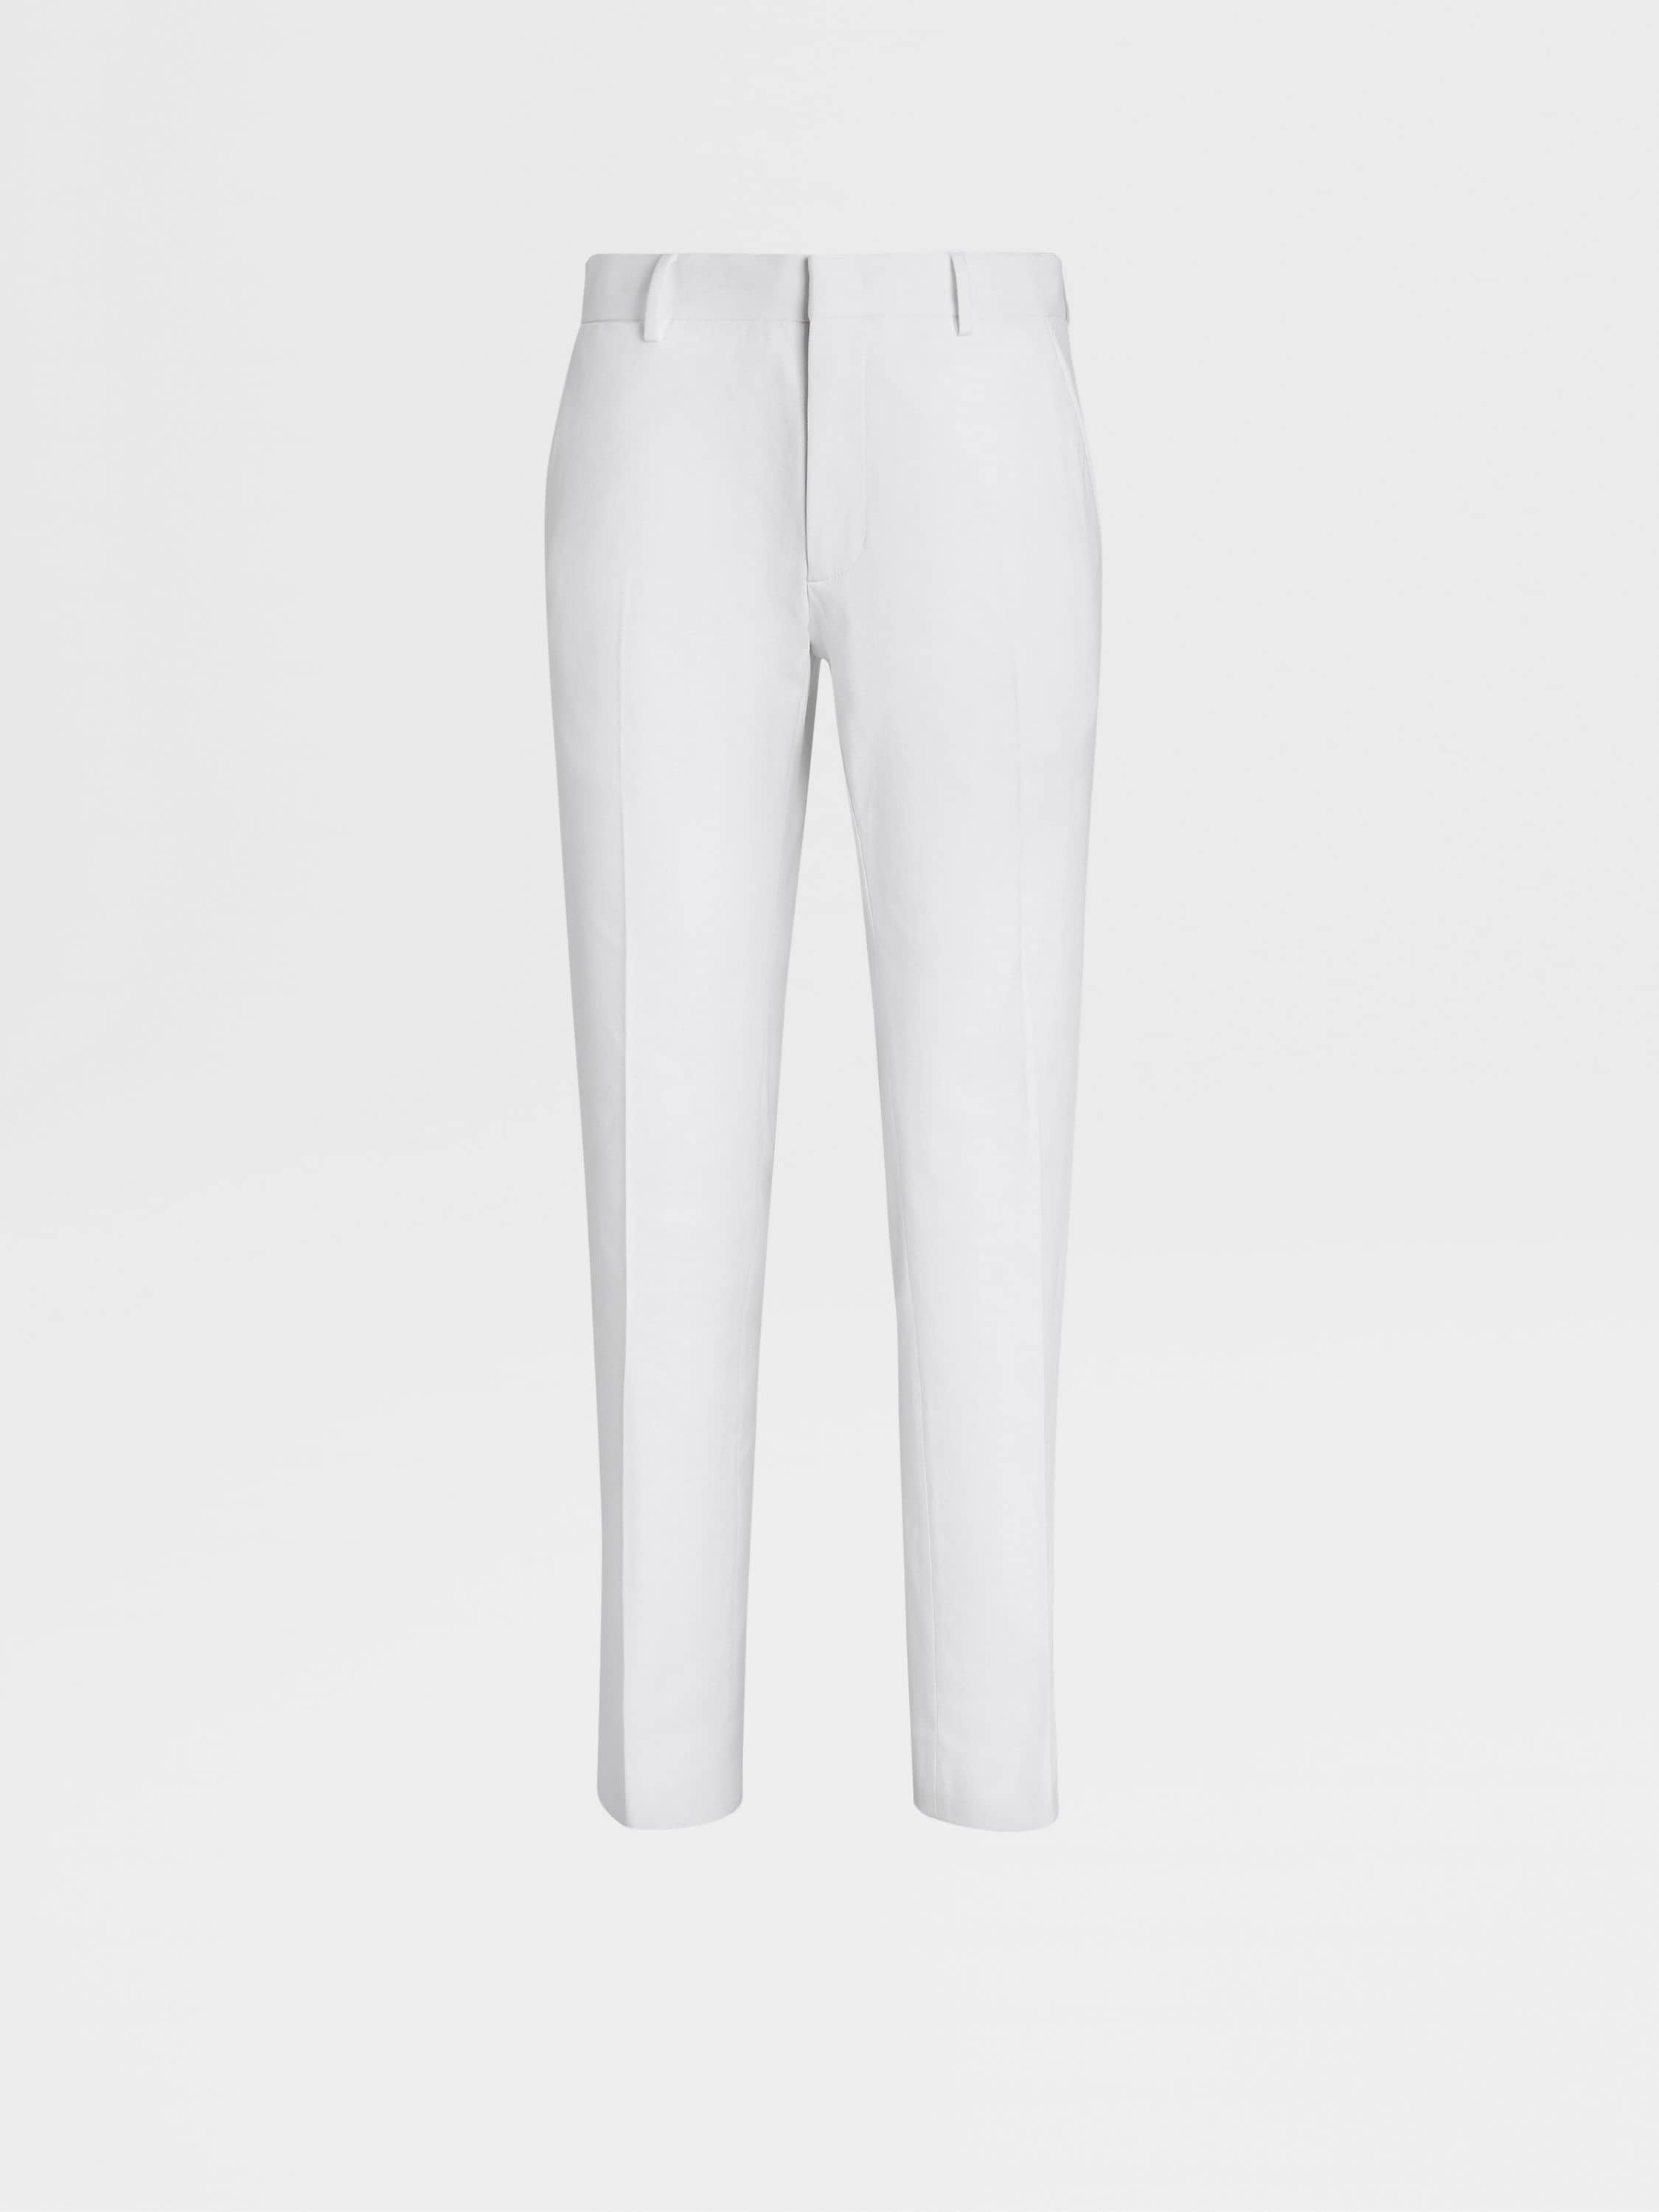 White Winter Crossover Cotton Pants